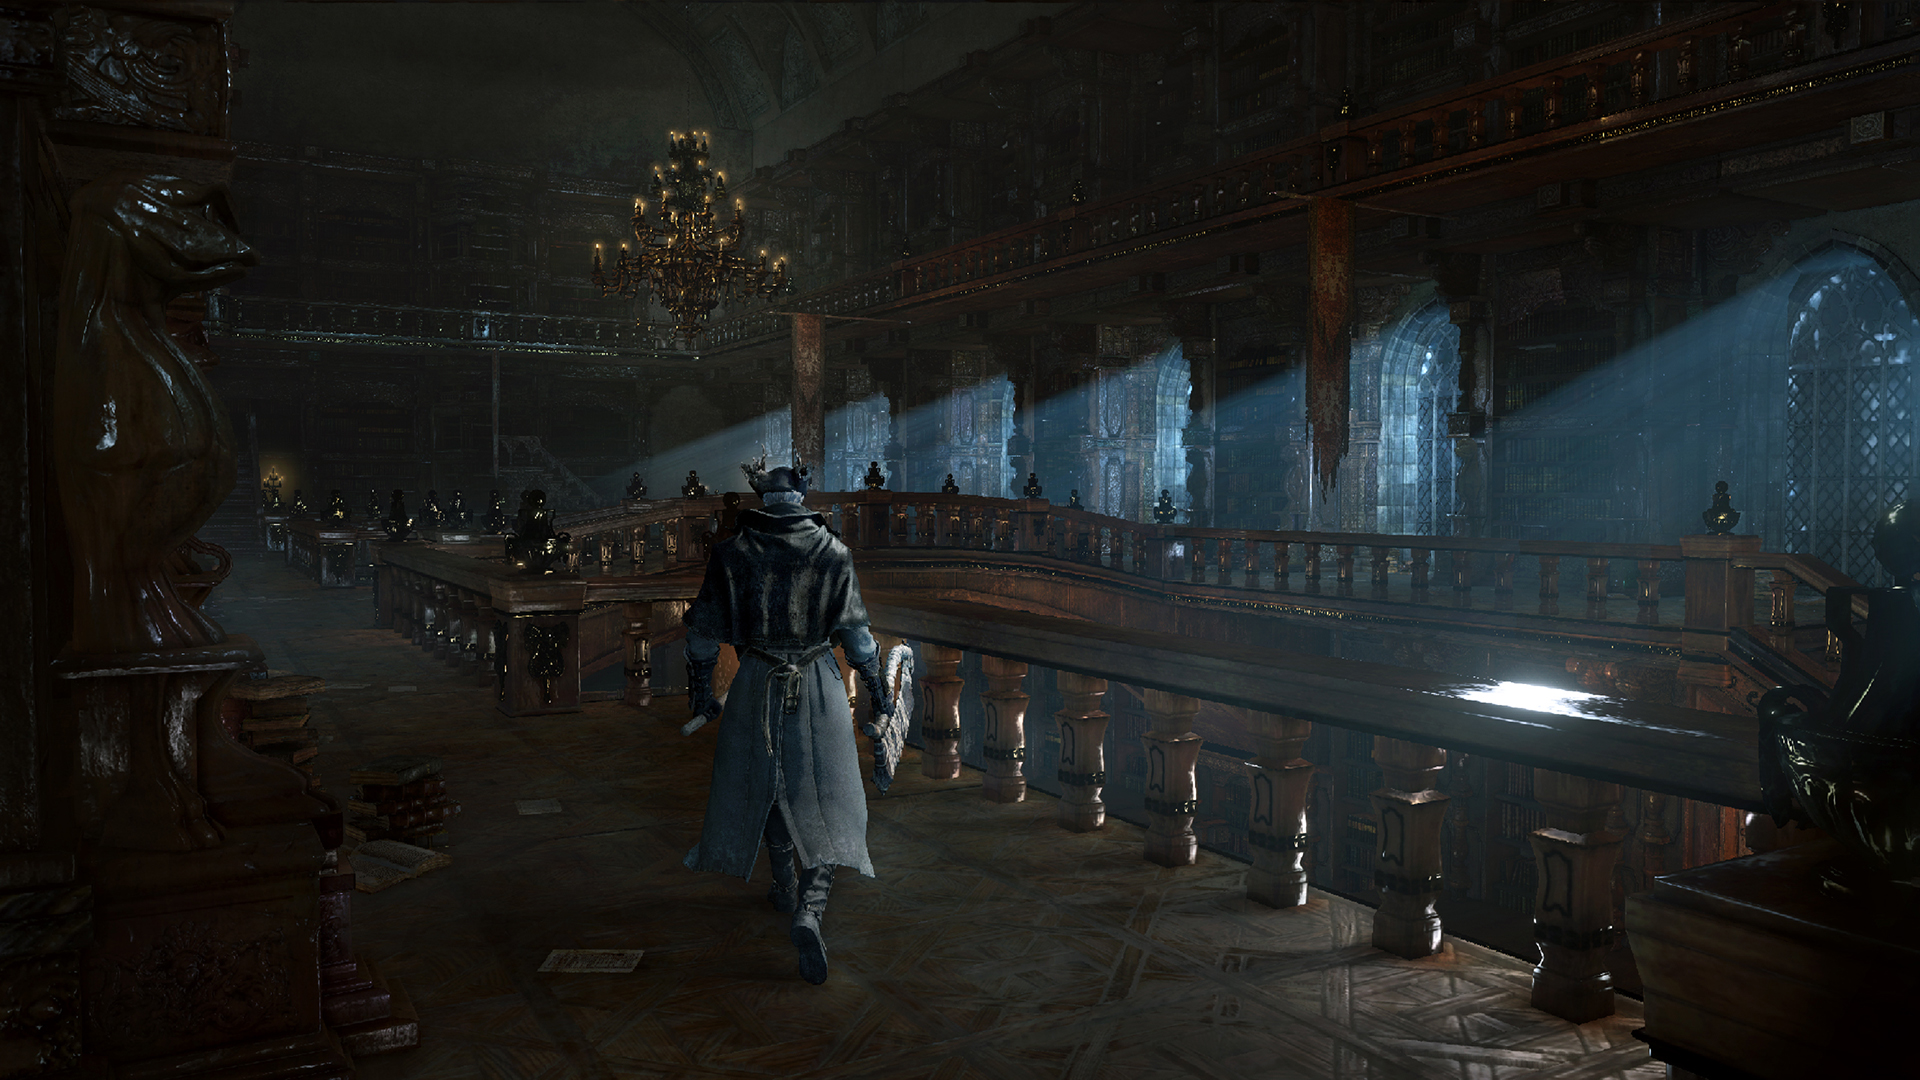 A New Hunter, Weapon, and Ghoulish New Regions are Revealed for Bloodborne